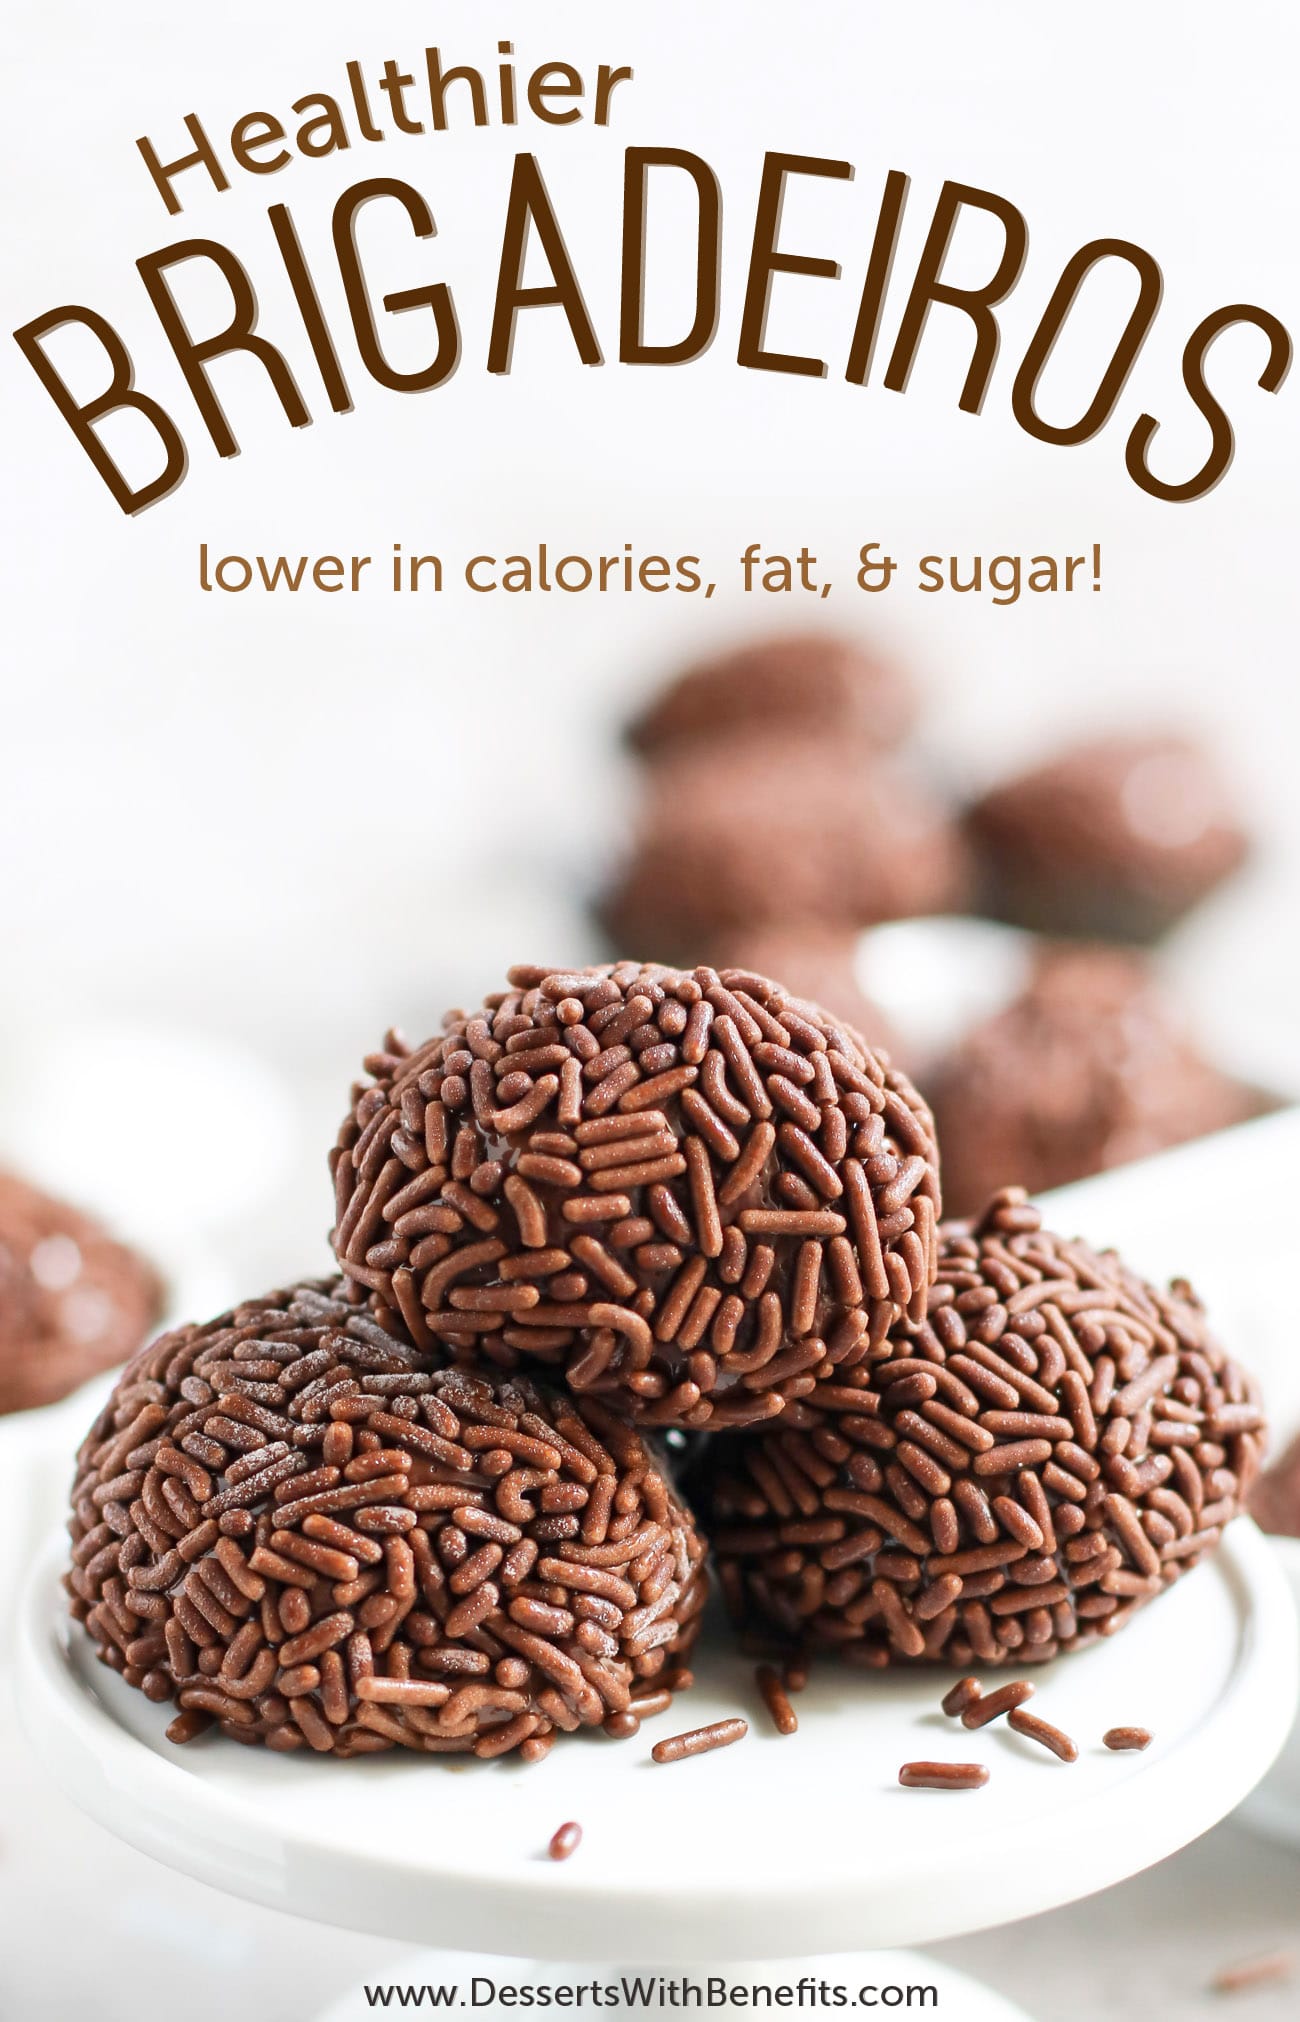 These Healthy Brigadeiros are ULTRA fudgy, smooth, and creamy, with a slight crunch from the chocolate sprinkles. The taste is SPOT ON! You'd never guess that these Brazilian chocolate truffles are made with healthier ingredient swaps to make them lower in calories, fat, and sugar compared to the original.